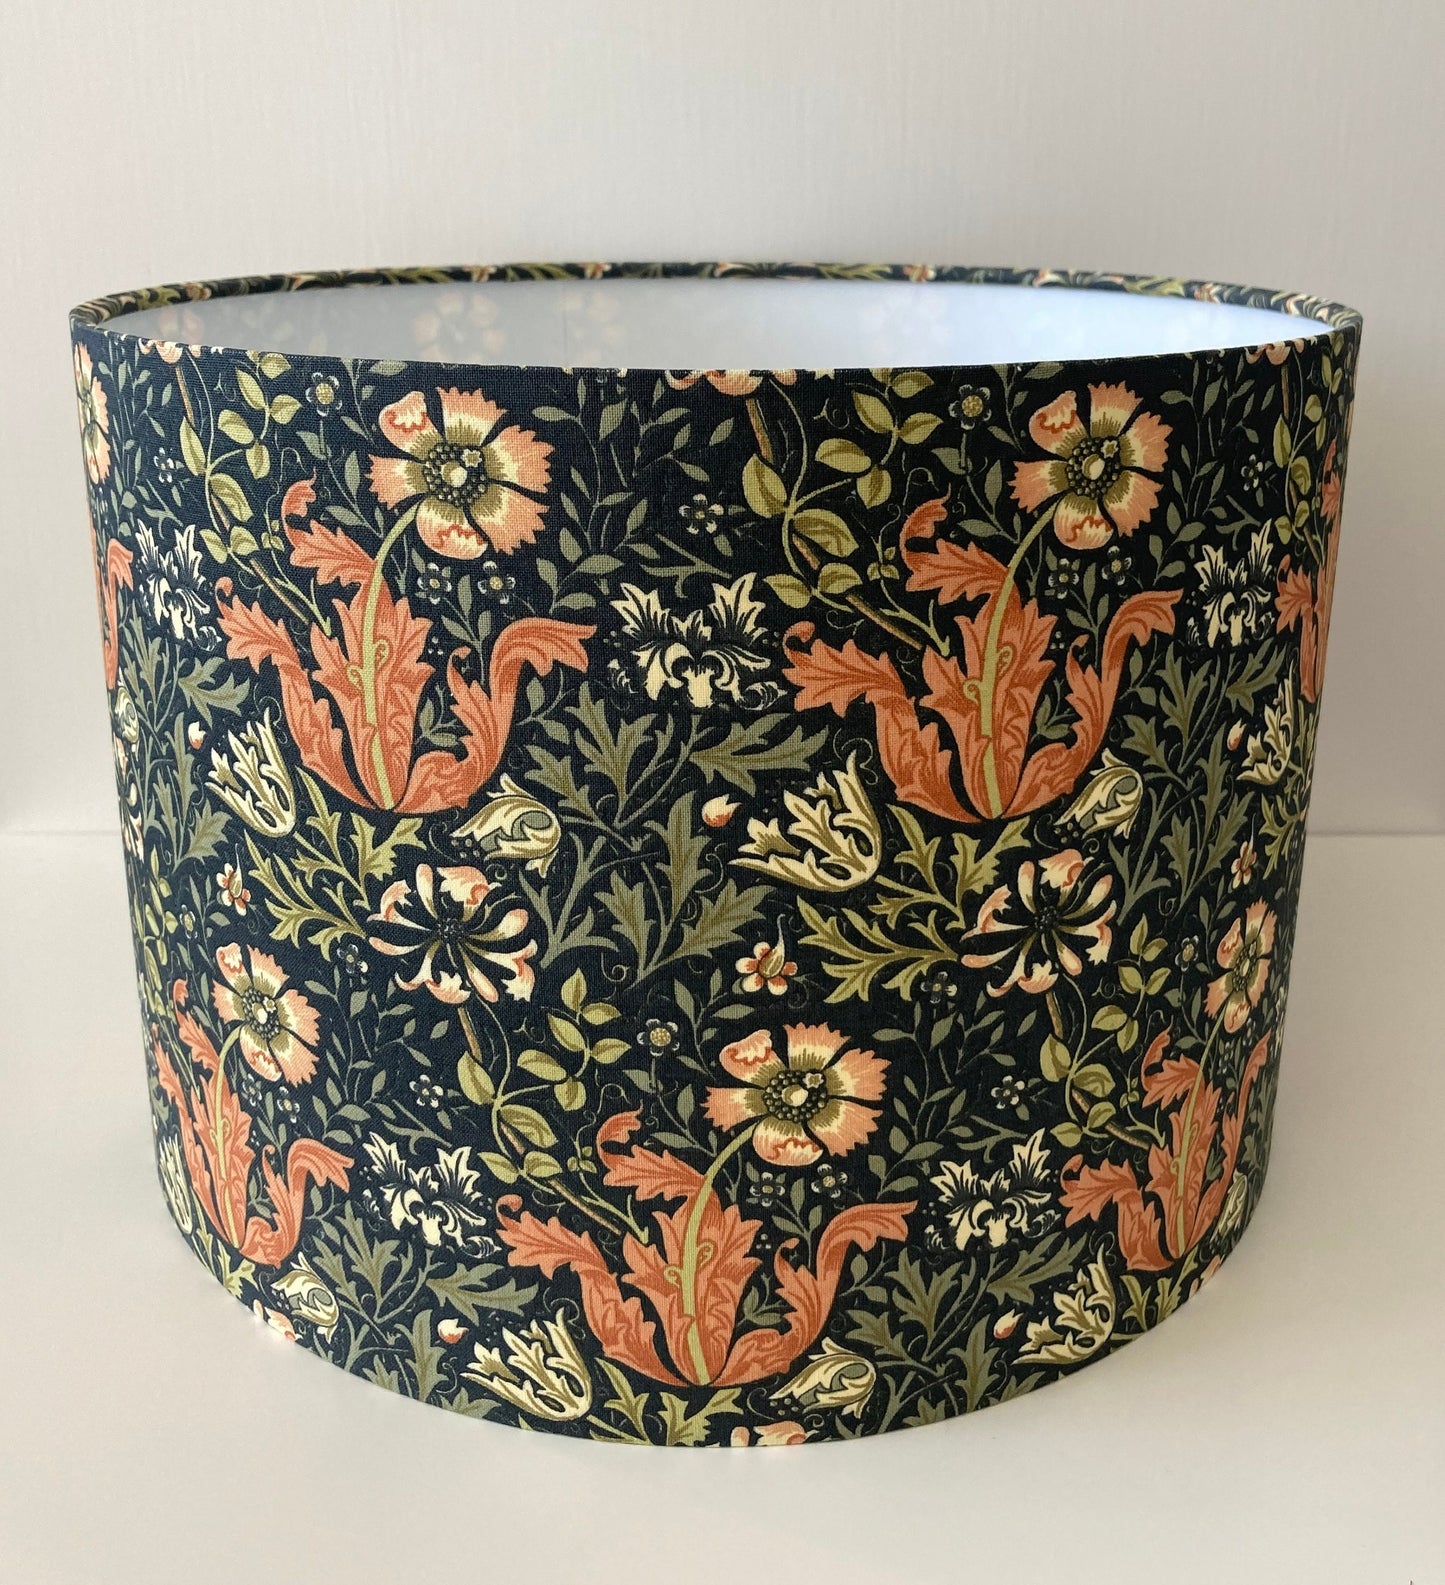 William Morris Compton Fabric Lampshade for Table or Ceiling Lamps